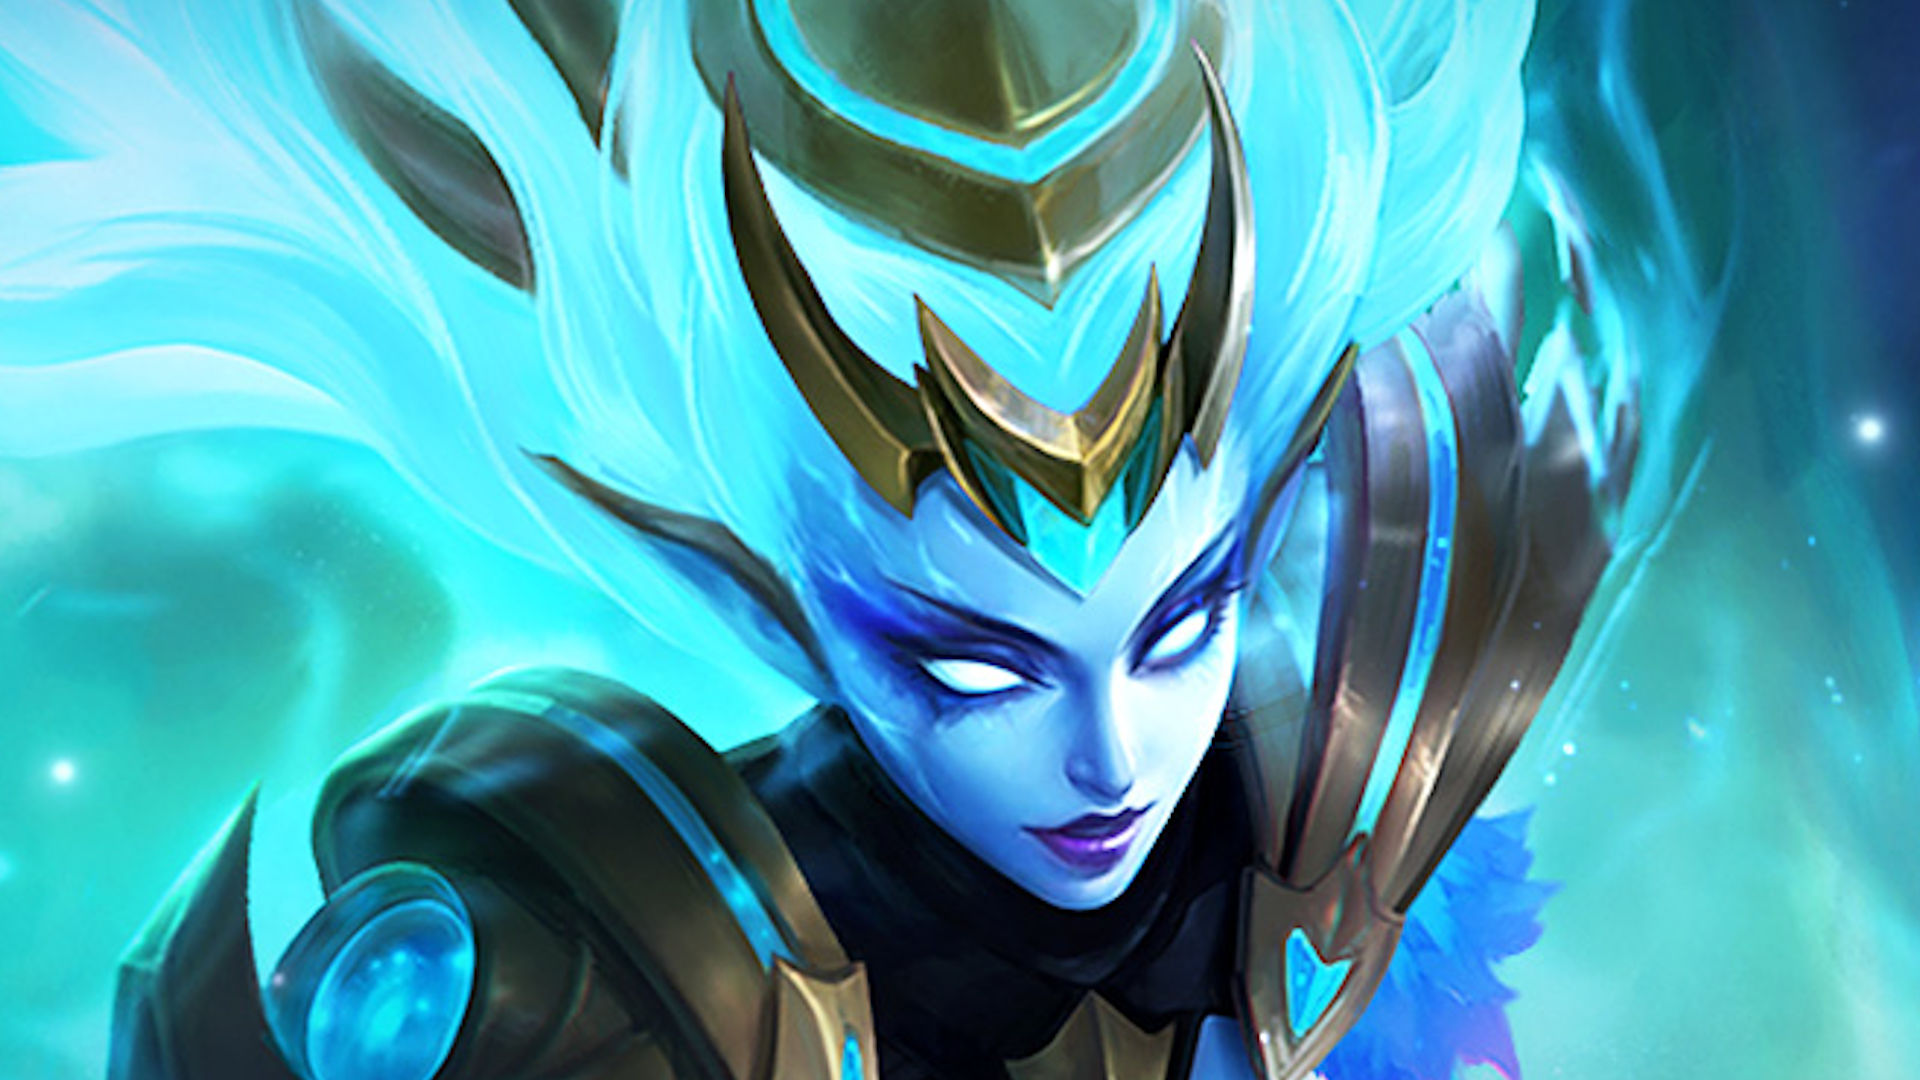 Mobile Legends for PC Download & Play (2023 Latest)